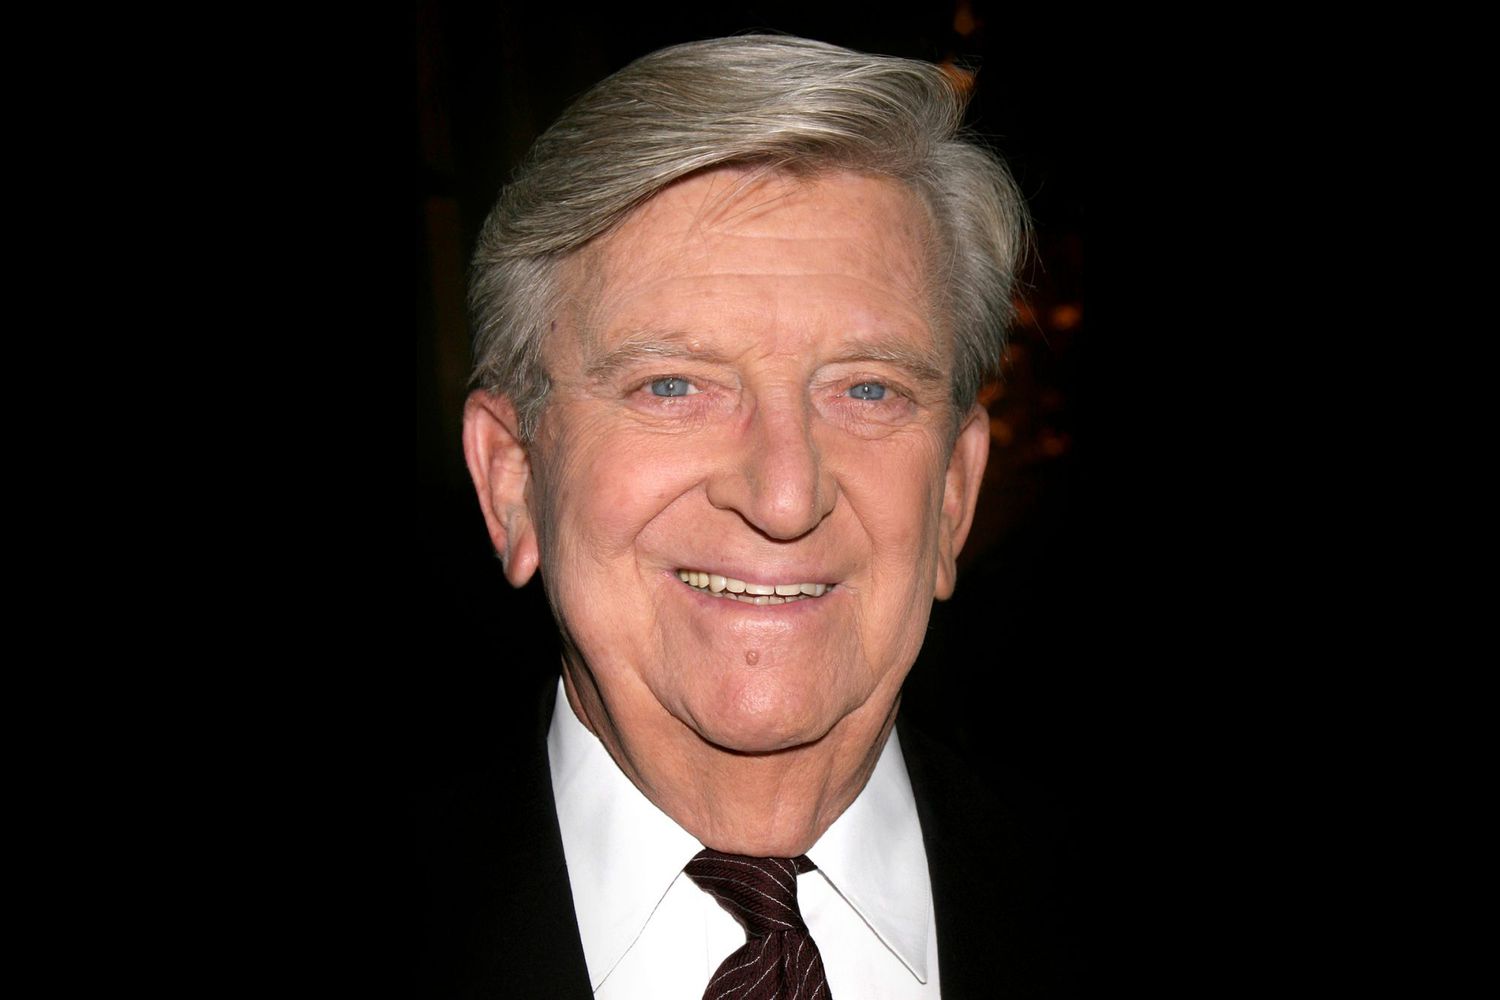 <p>The beloved Young and the Restless and General Hospital soap star died on Nov. 5 at 88 years old, his daughter Tiffany Harmon announced on Facebook. The actor died peacefully at his home in L.A., where he had lived for more than 40 years.</p>
                            <p>"My beautiful father, William Wintersole, passed in the stealth of the night at age 88. Tuesday 11/5/19," Harmon wrote.</p>
                            <p>"I'm so glad that I got to share him on my show with my listeners," she added. "As a Hollywood actor for 60 years, he touched many ppls lives. I did EVERYTHING I could for him..and that brings me peace. But alas&hellip;I miss him so. One love!"</p>
                            <p>The star is survived by several family members, including life partner Marlene Silverstein, as well as his daughters Tiffany Harmon, who lives in L.A., and Katherine Ramsey, who lives in Ohio. He is also survived by three granddaughters, Kristy, Amy and Jill, and his only great-granddaughter, Abby, who all live in Ohio.</p>
                            